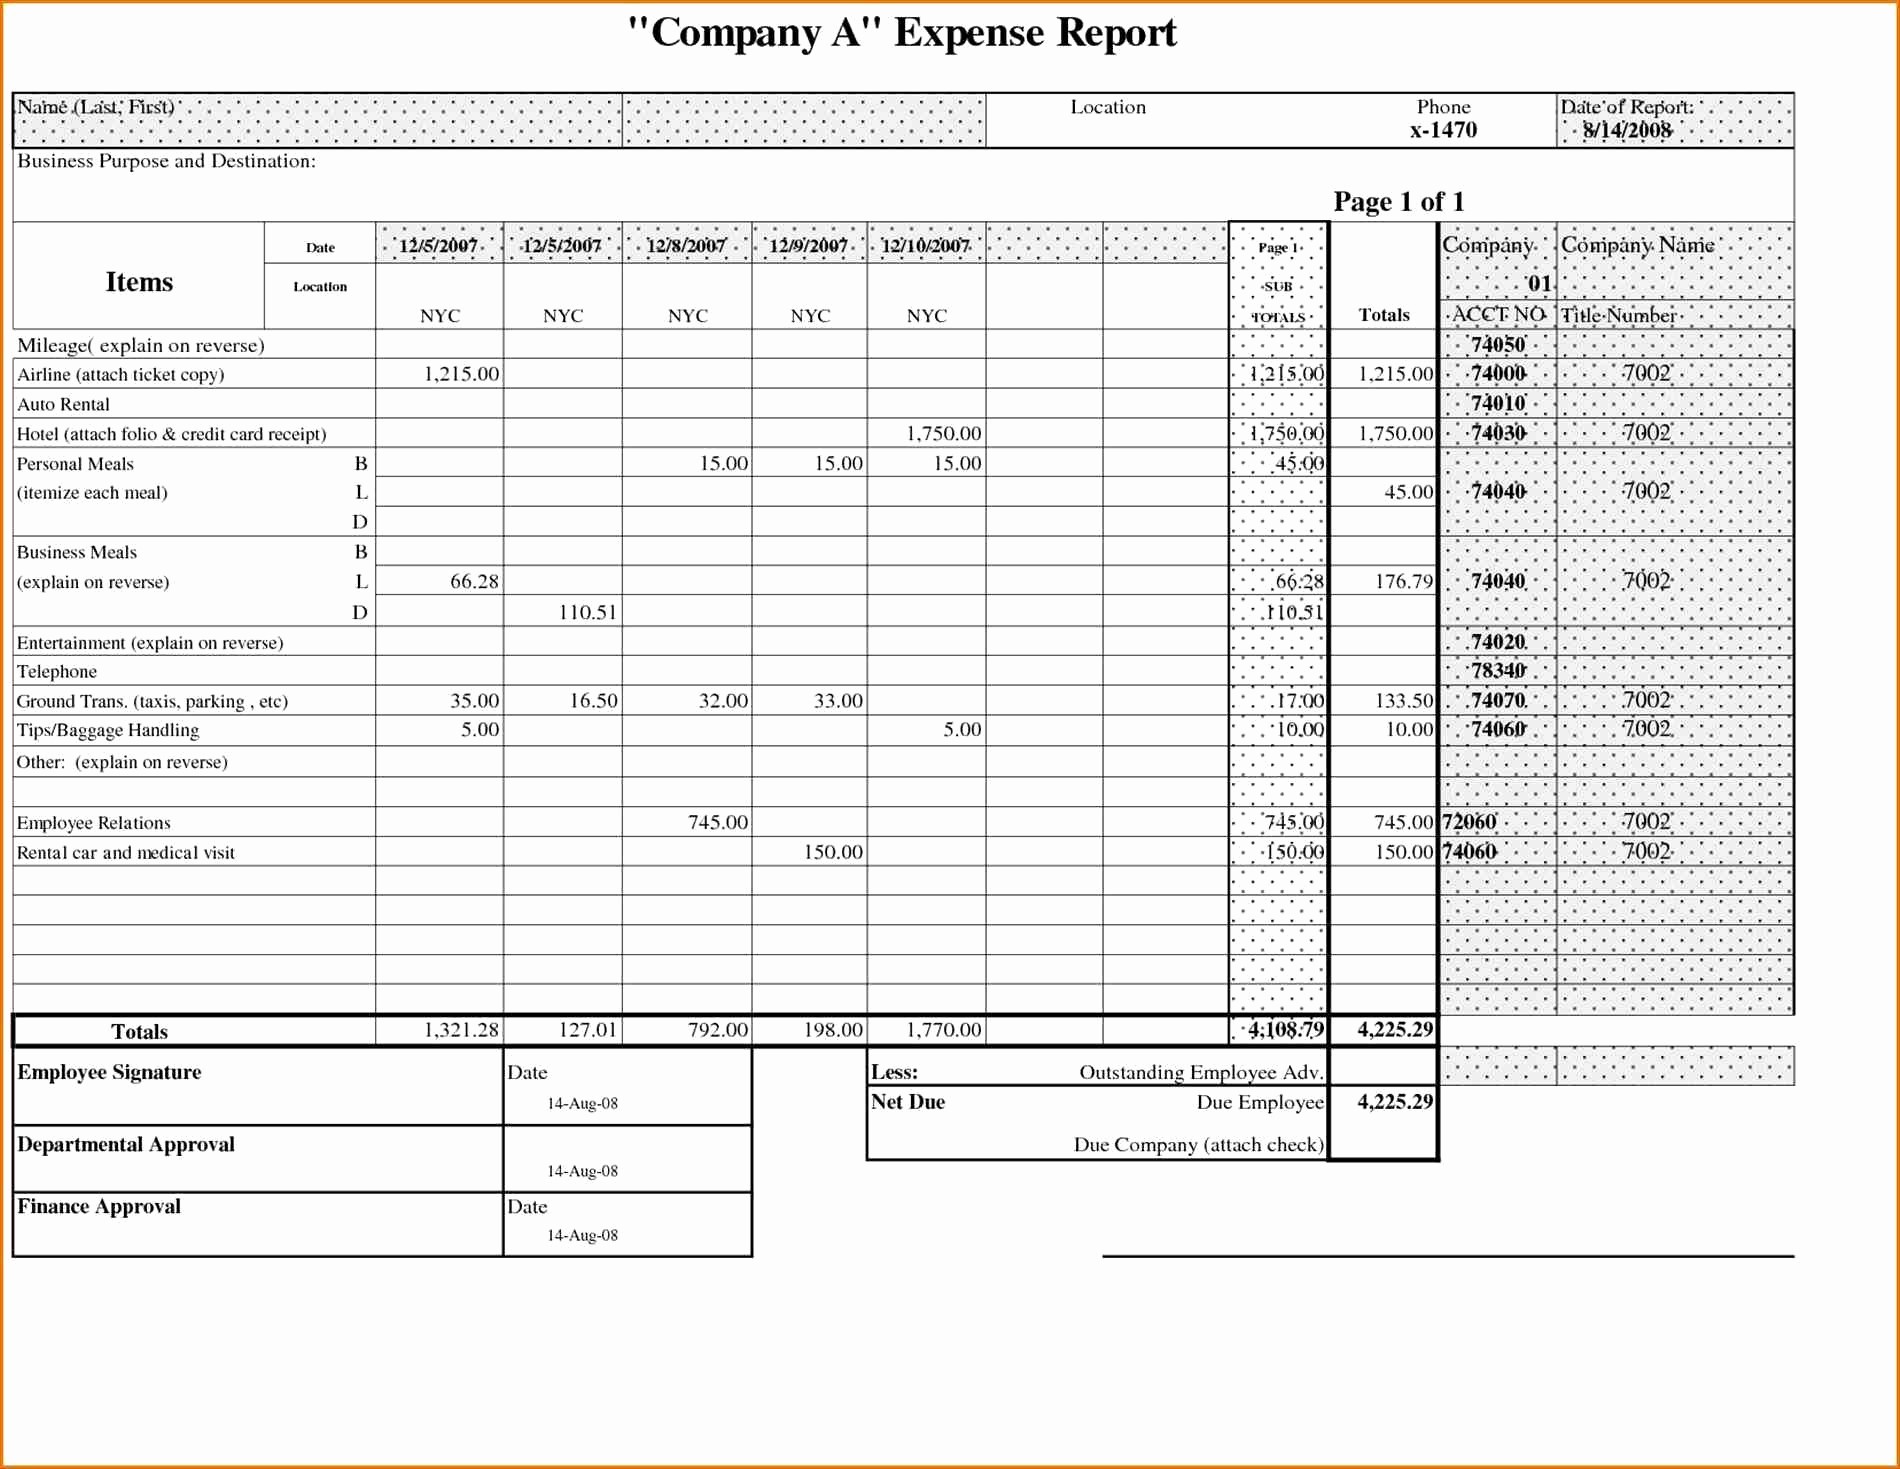 50 Luxury Excel Medical Expense Template DOCUMENTS IDEAS Document